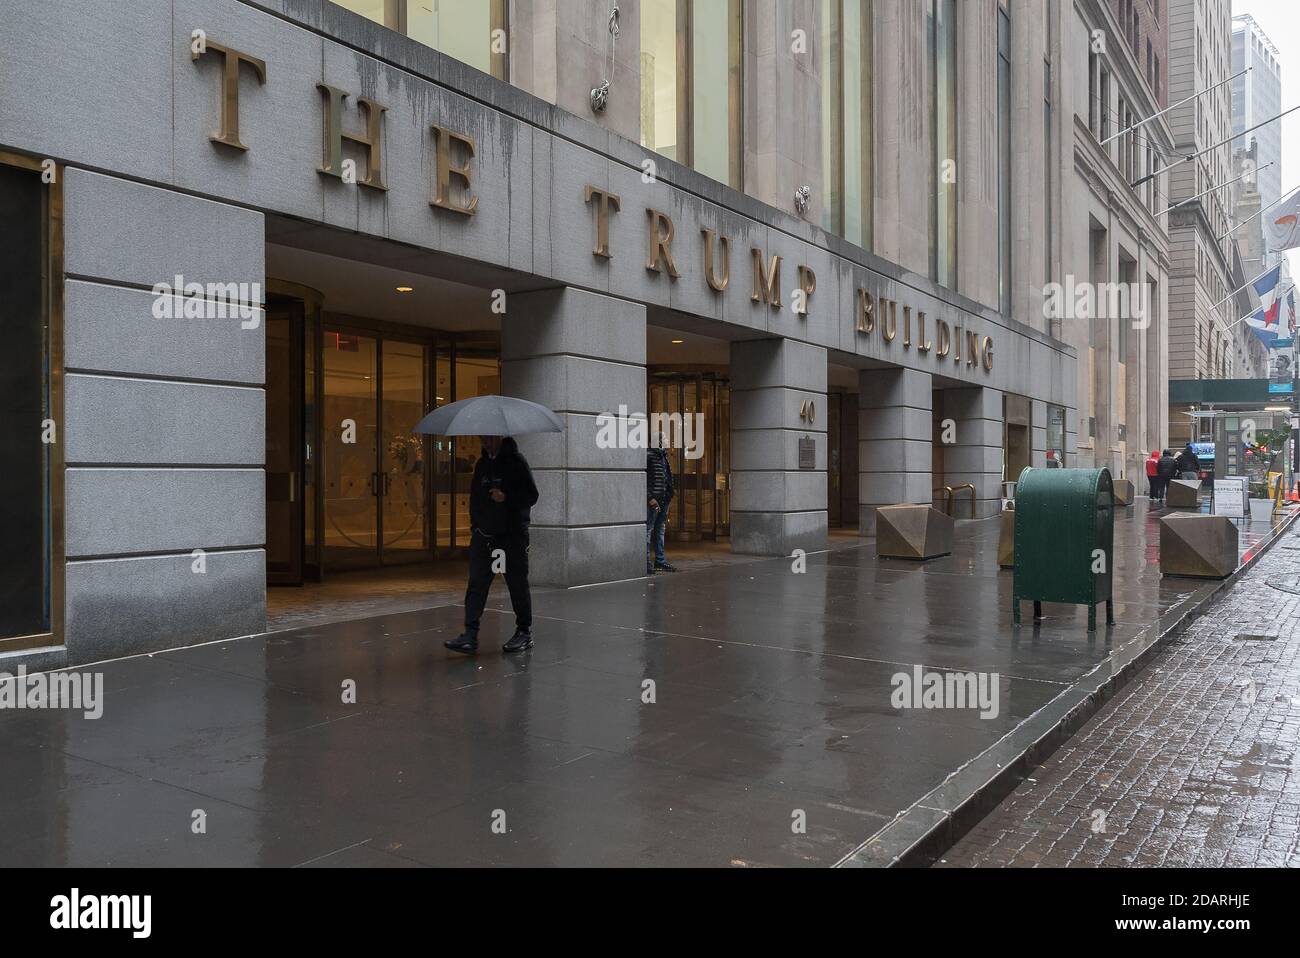 Manhattan, New York. November 13, 2020. View of the entrance of 'The Trump Building' in the Financial district. Stock Photo